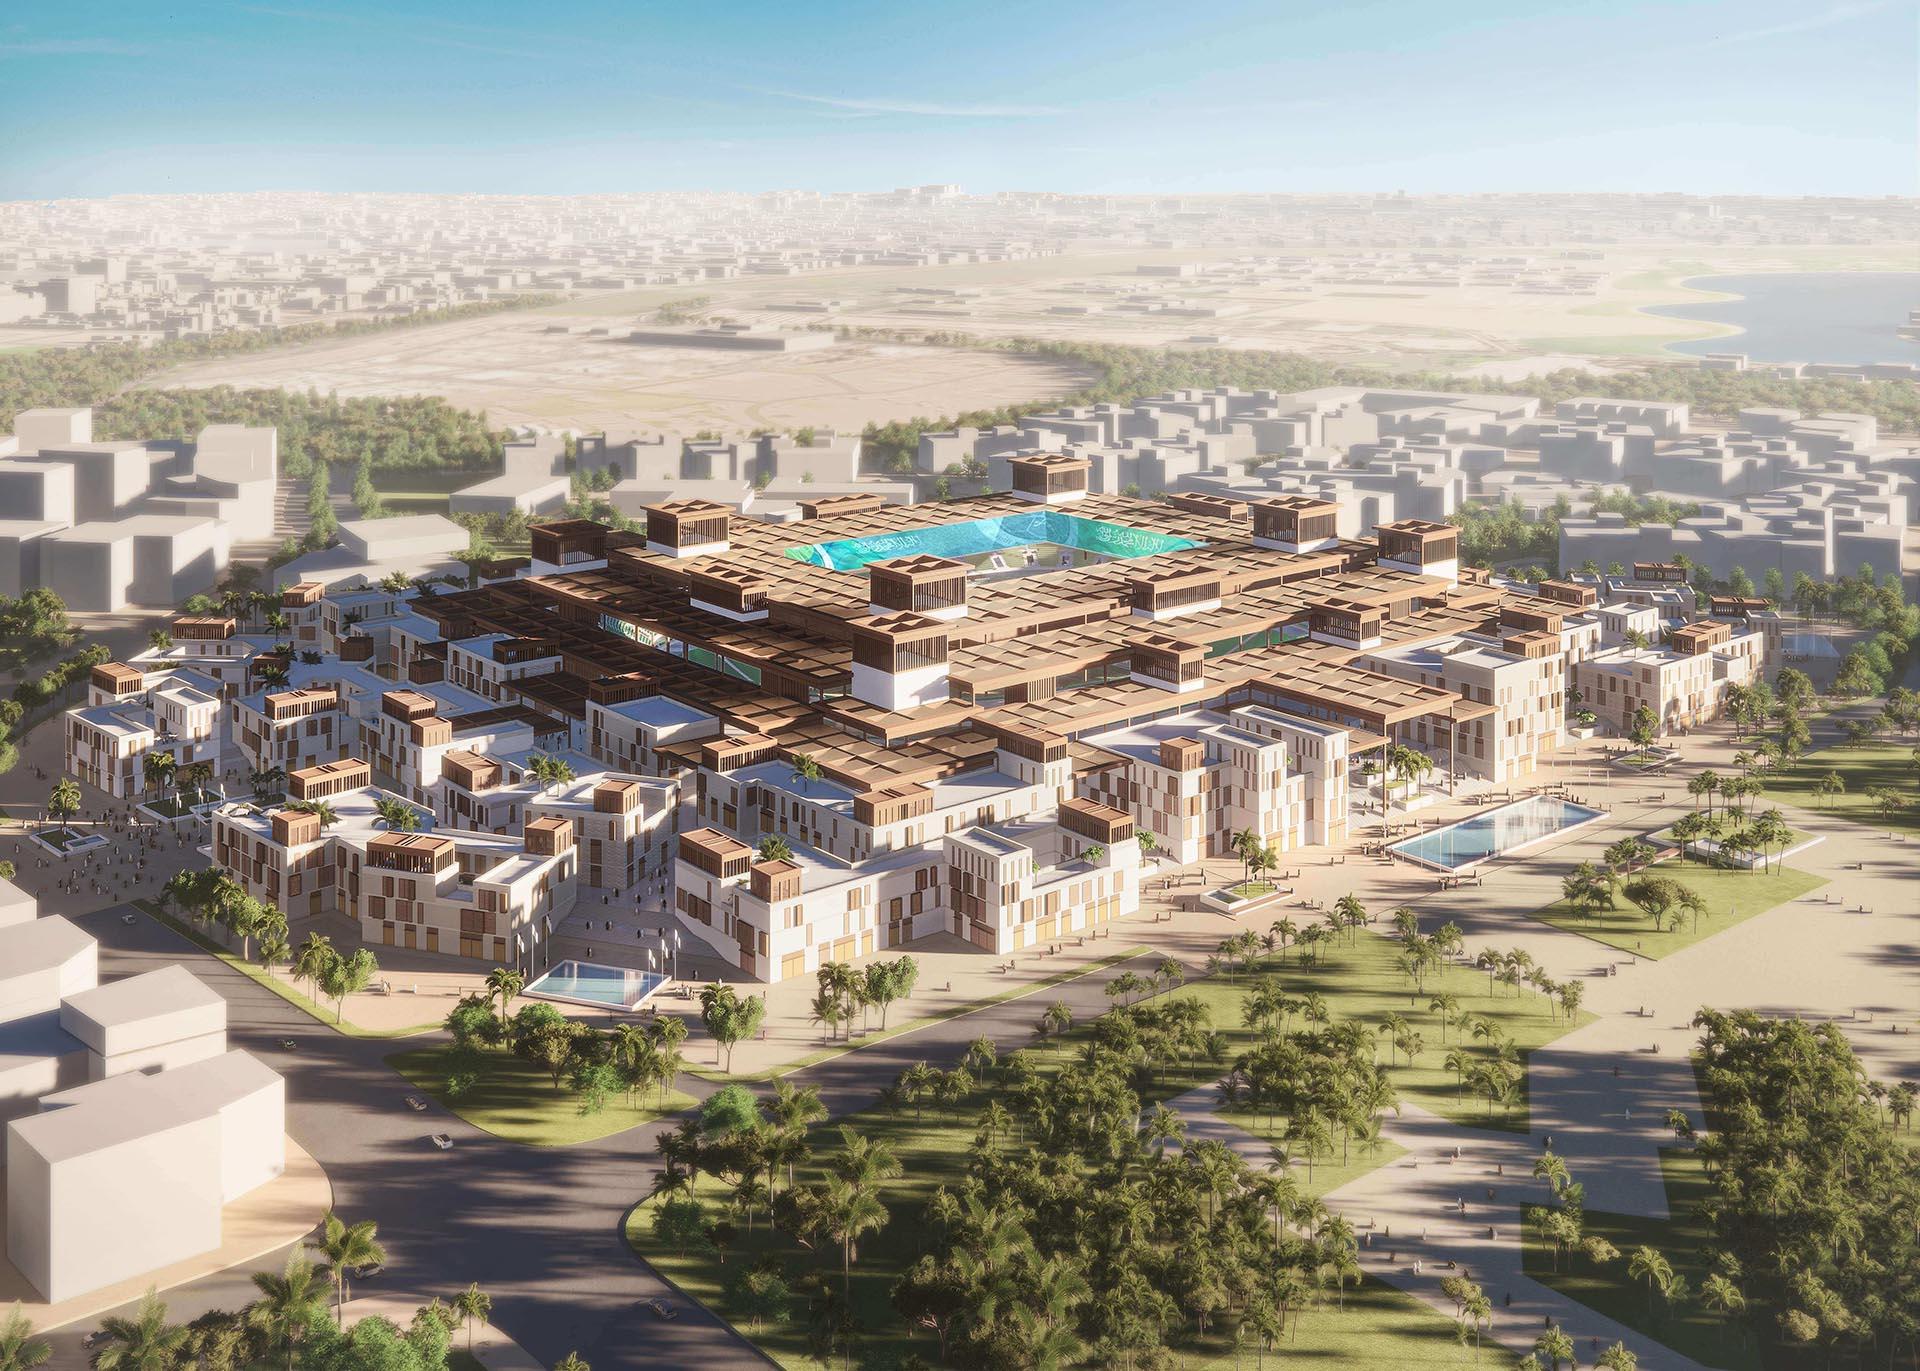 Saudi crown prince launches $20B ‘Downtown Jeddah’ project